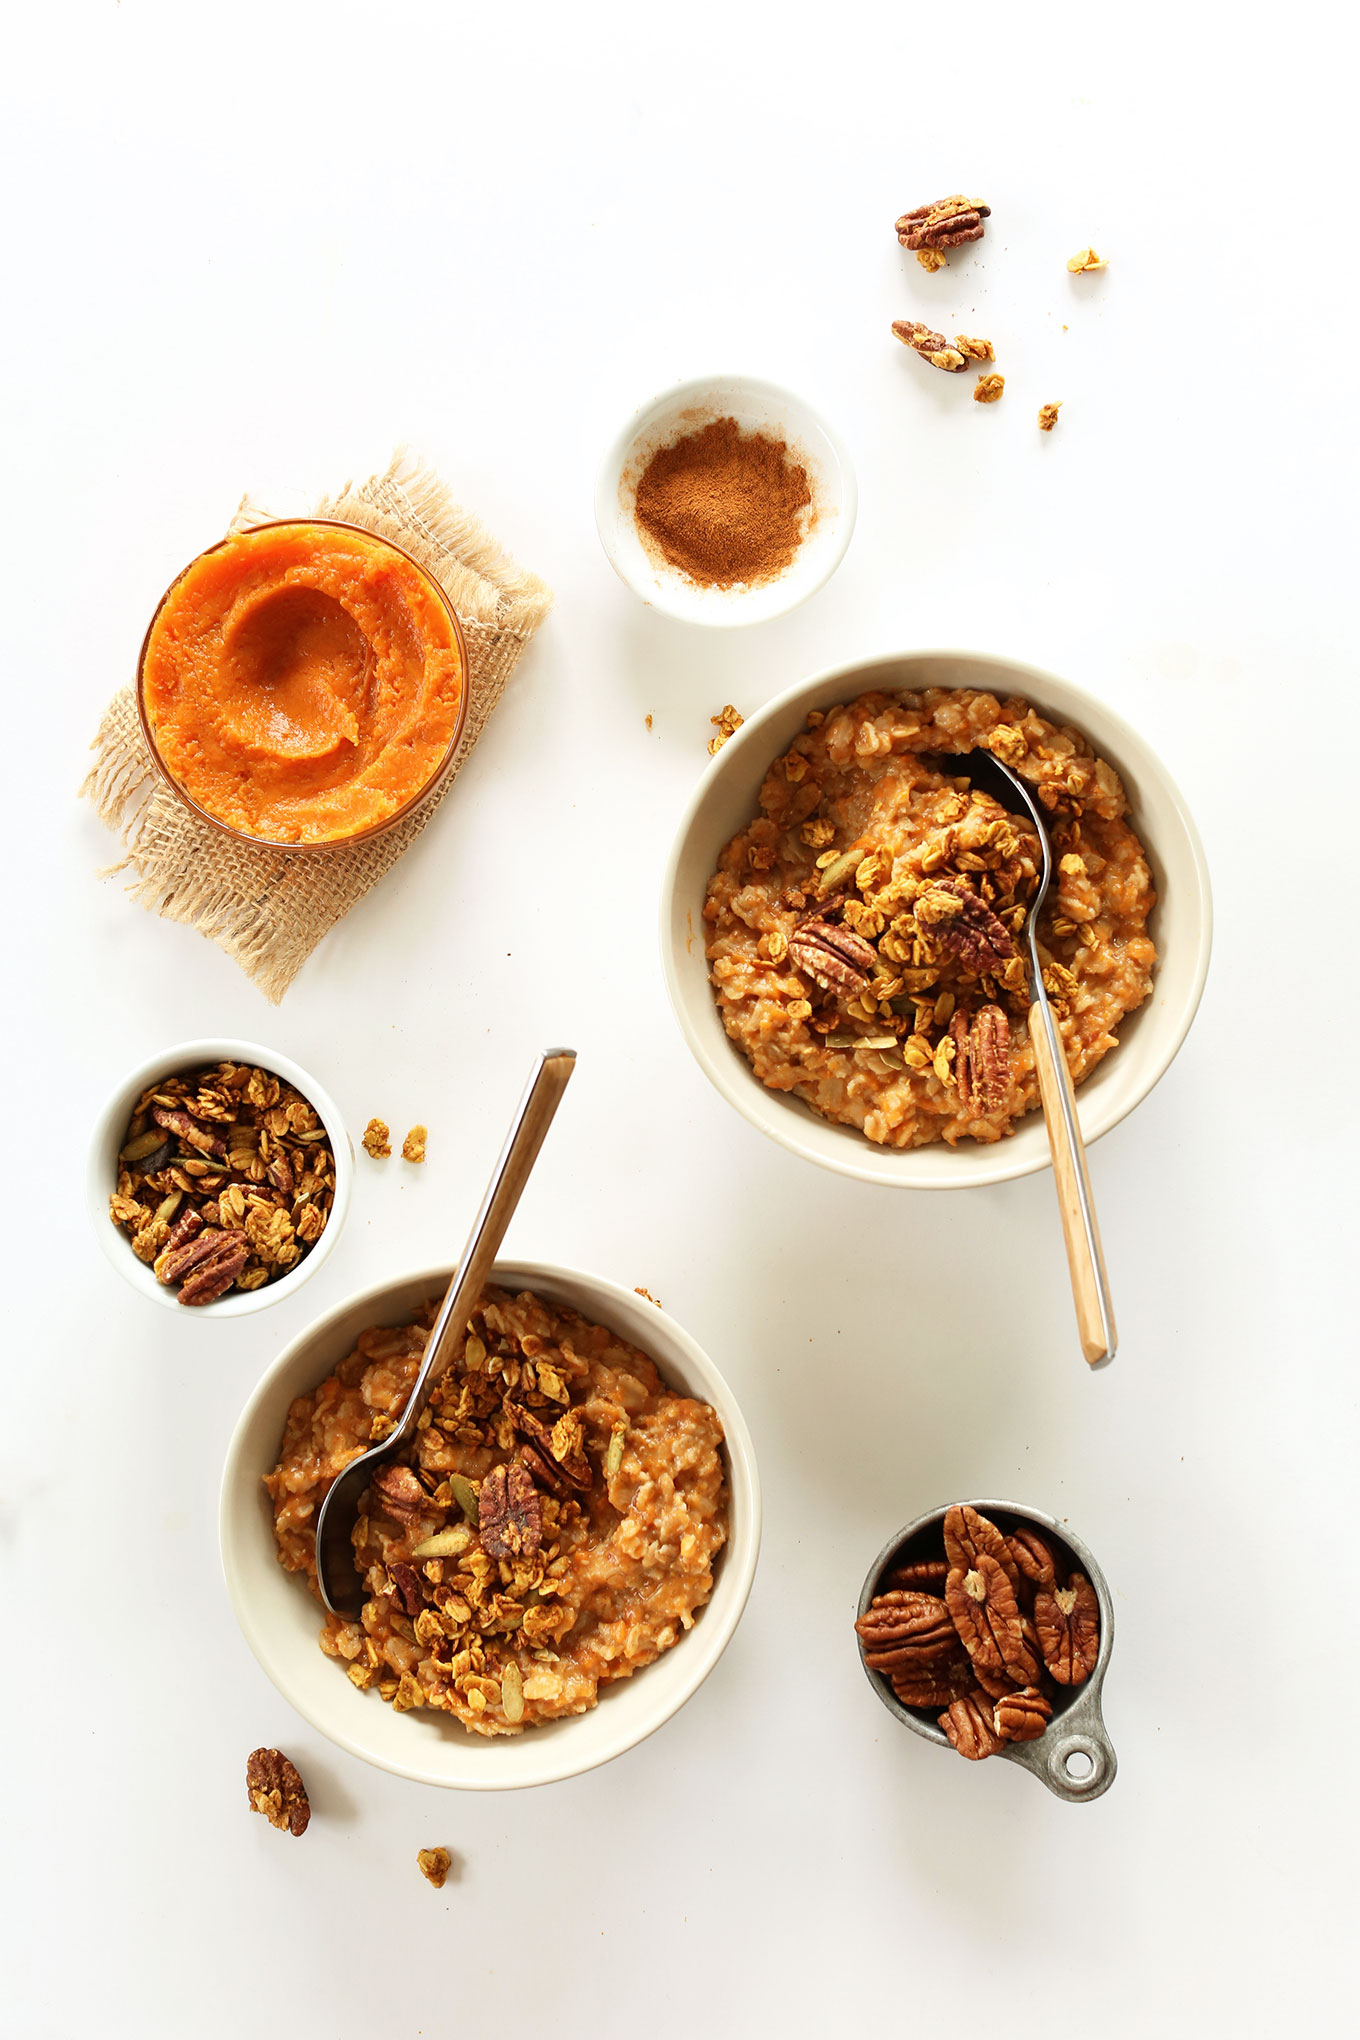 Bowls of our Sweet Potato pie Oats alongside nuts, puree, and cinnamon to make it